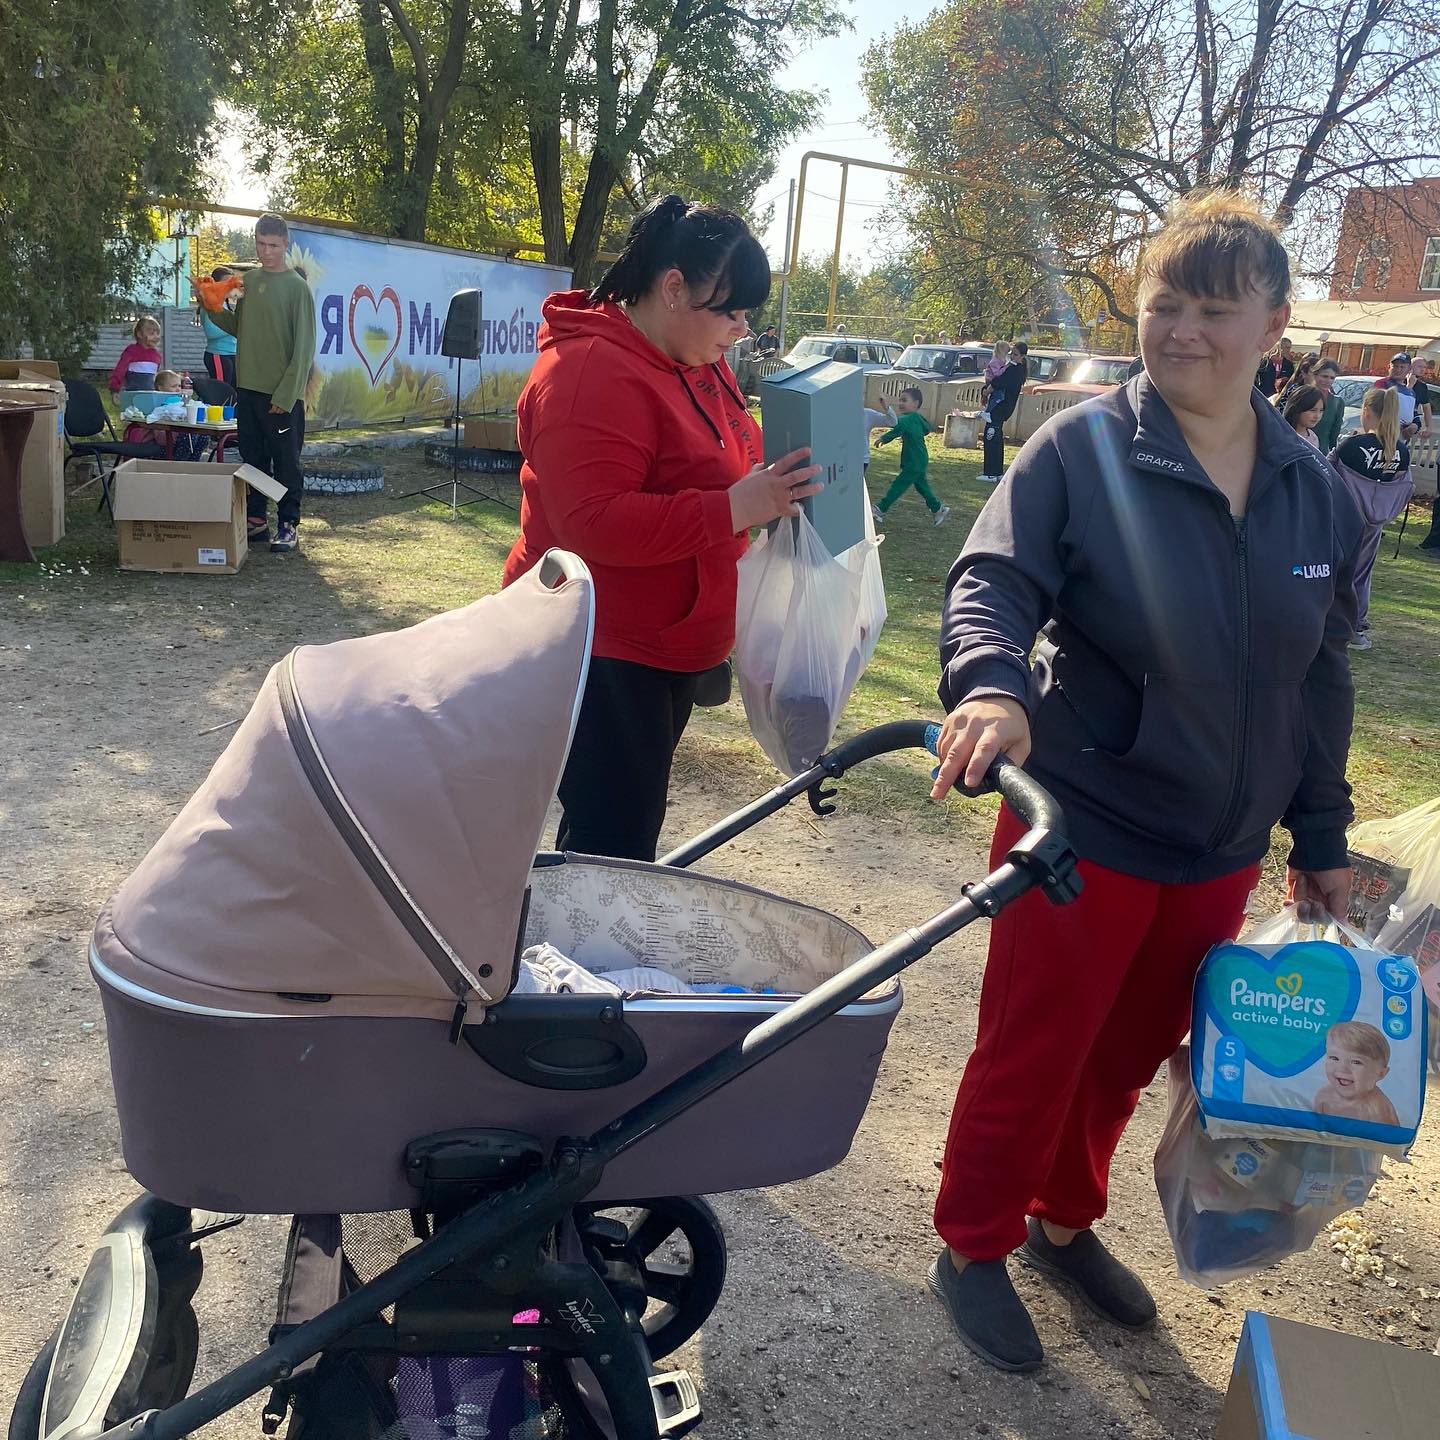 Two women standing next to a stroller with diapers in it.